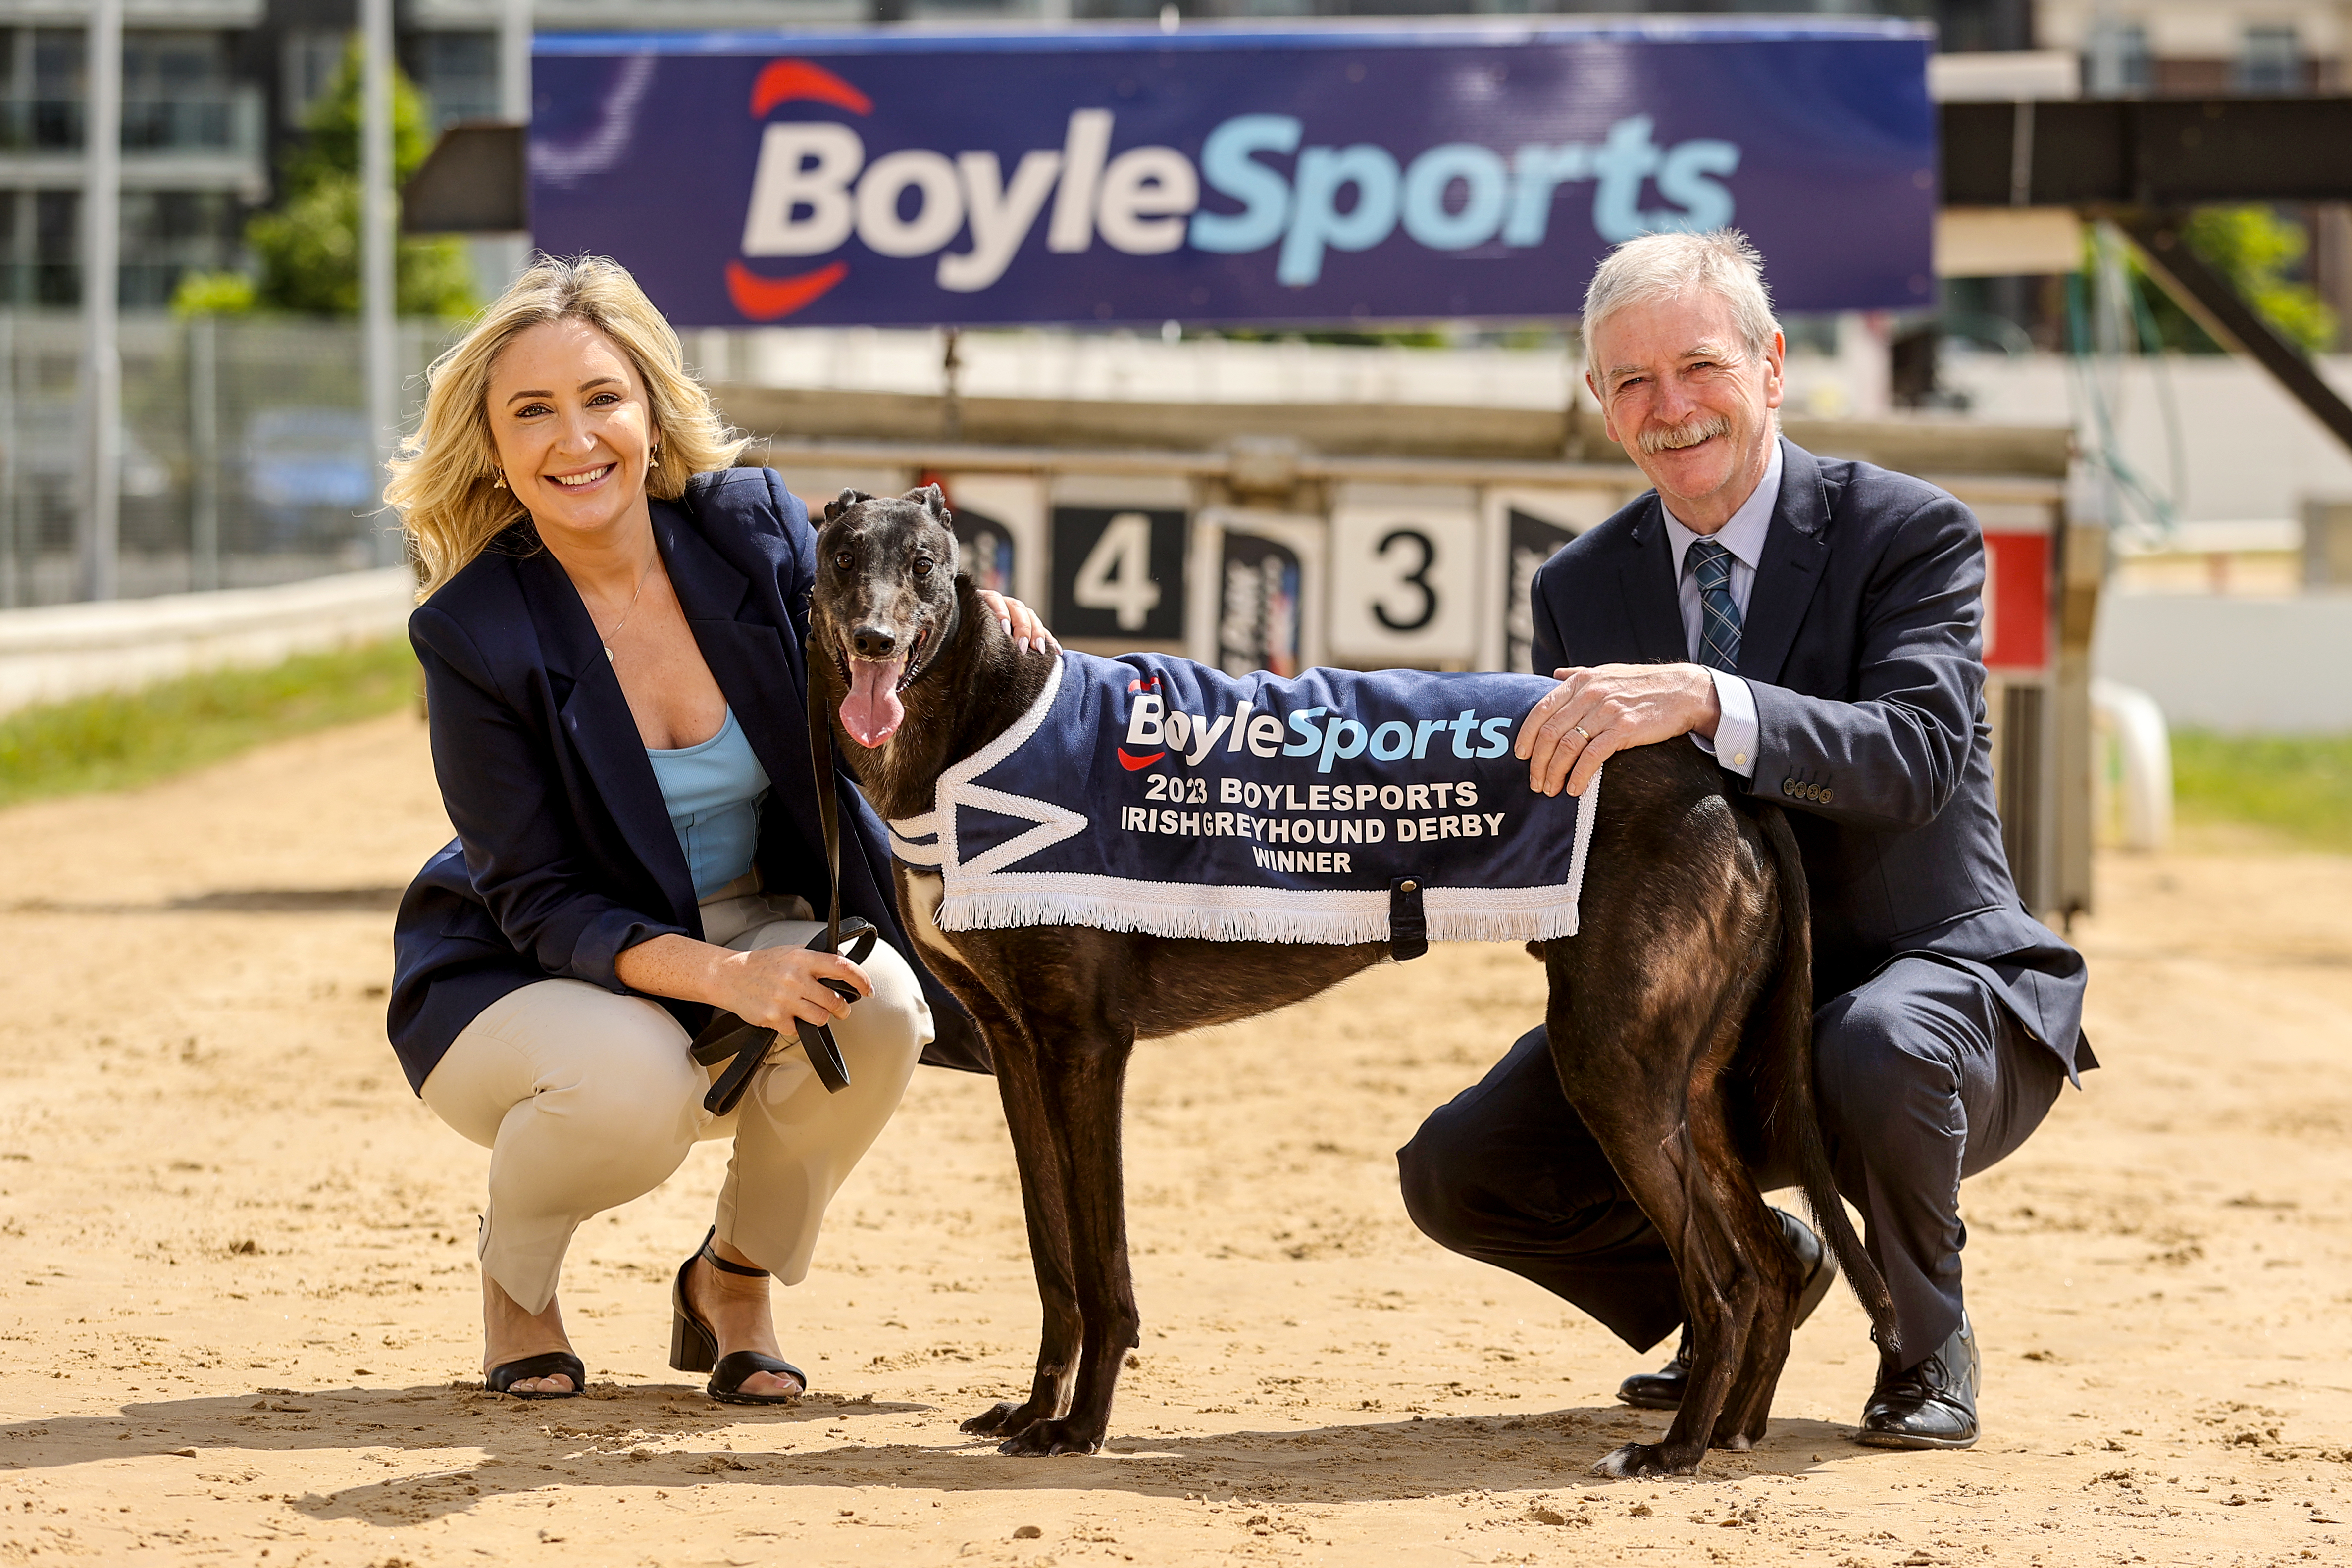 Sharon McHugh, BoyleSports Head of PR and Sponsorship, and John Tuohey, Interim CEO of Greyhound Racing Ireland, pictured at the launch of the 2023 BoyleSports Irish Greyhound Derby at Dublin’s Shelbourne Park Greyhound Stadium, where it was announced that BoyleSports is extending its sponsorship of the event for a further three-years. 